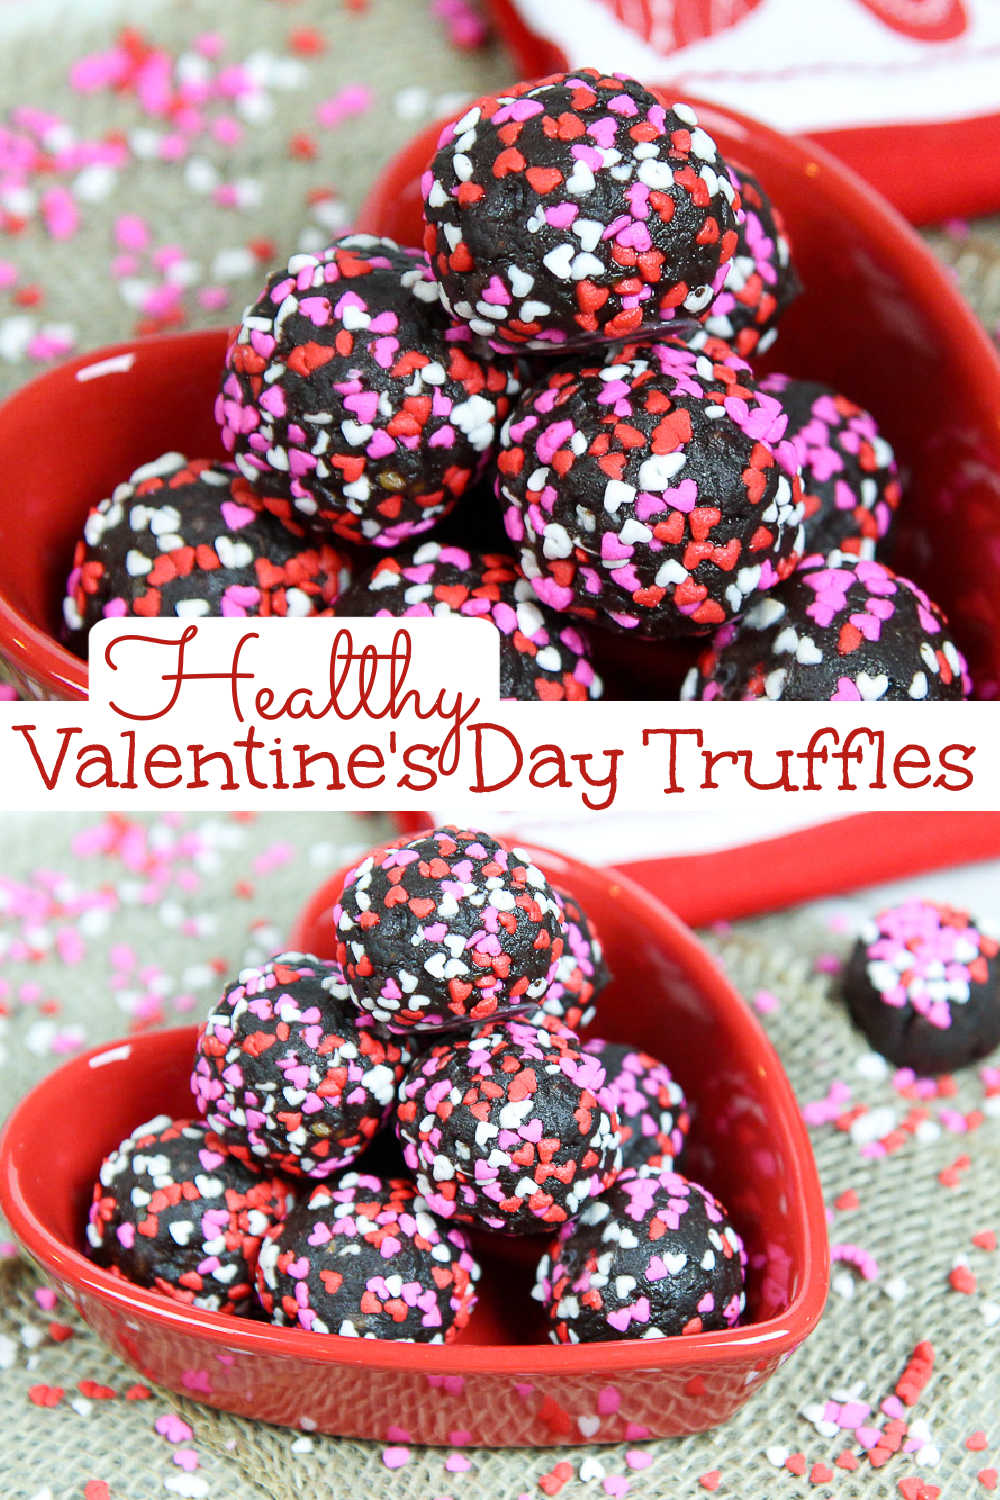 Clean Eating Healthy Chocolate & Date Truffles recipe for Valentine's Day. Only 4 Ingredients. The perfect easy, raw vegan energy bites dessert recipes! This dairy free treat is delicious and features almond butter or your favorite nut butter. / Running in a Skirt via @juliewunder